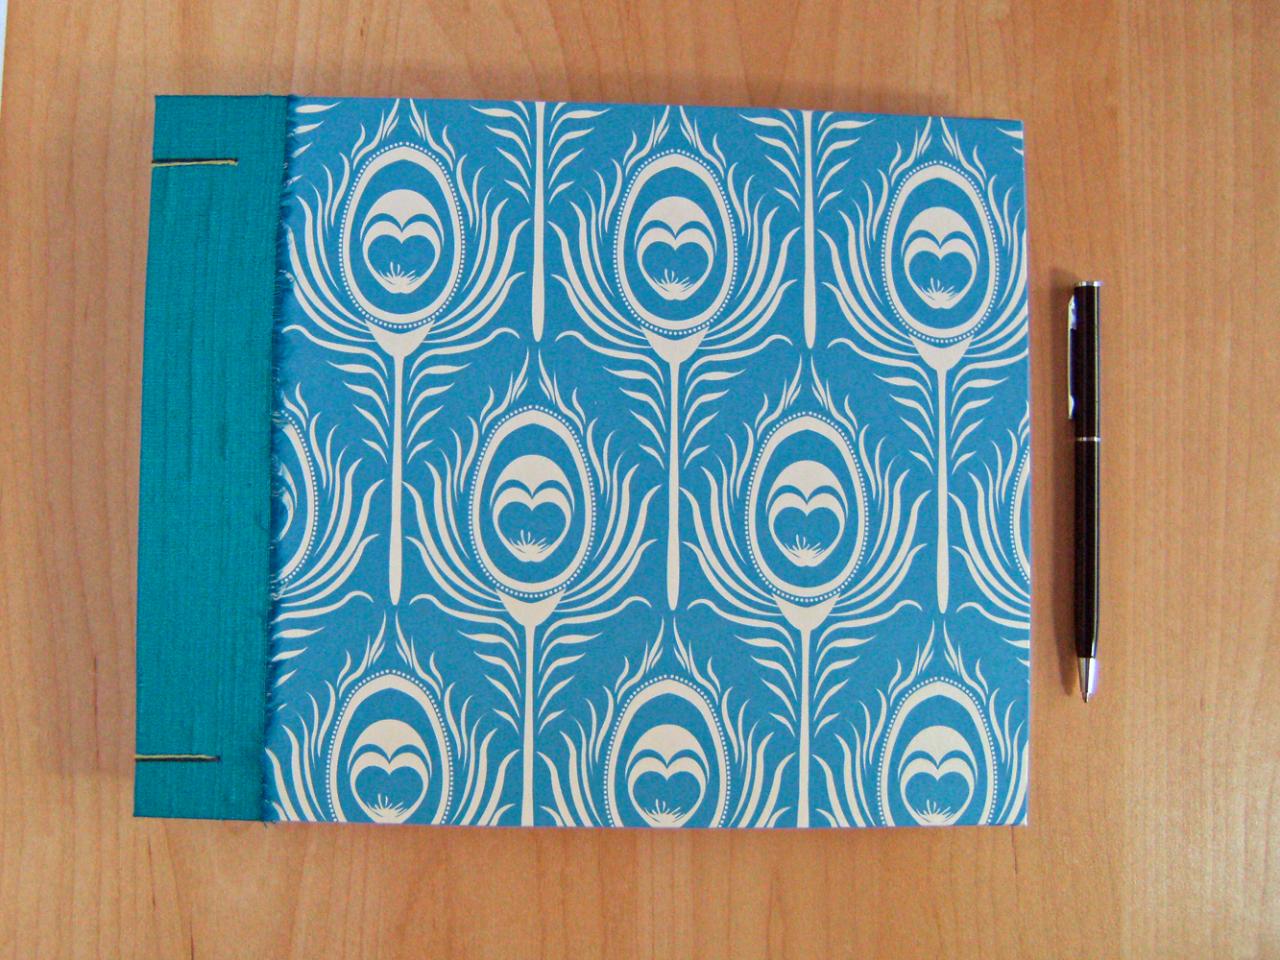 Peacock Wedding Album Guest Book With Decorative Hand Stitched Binding